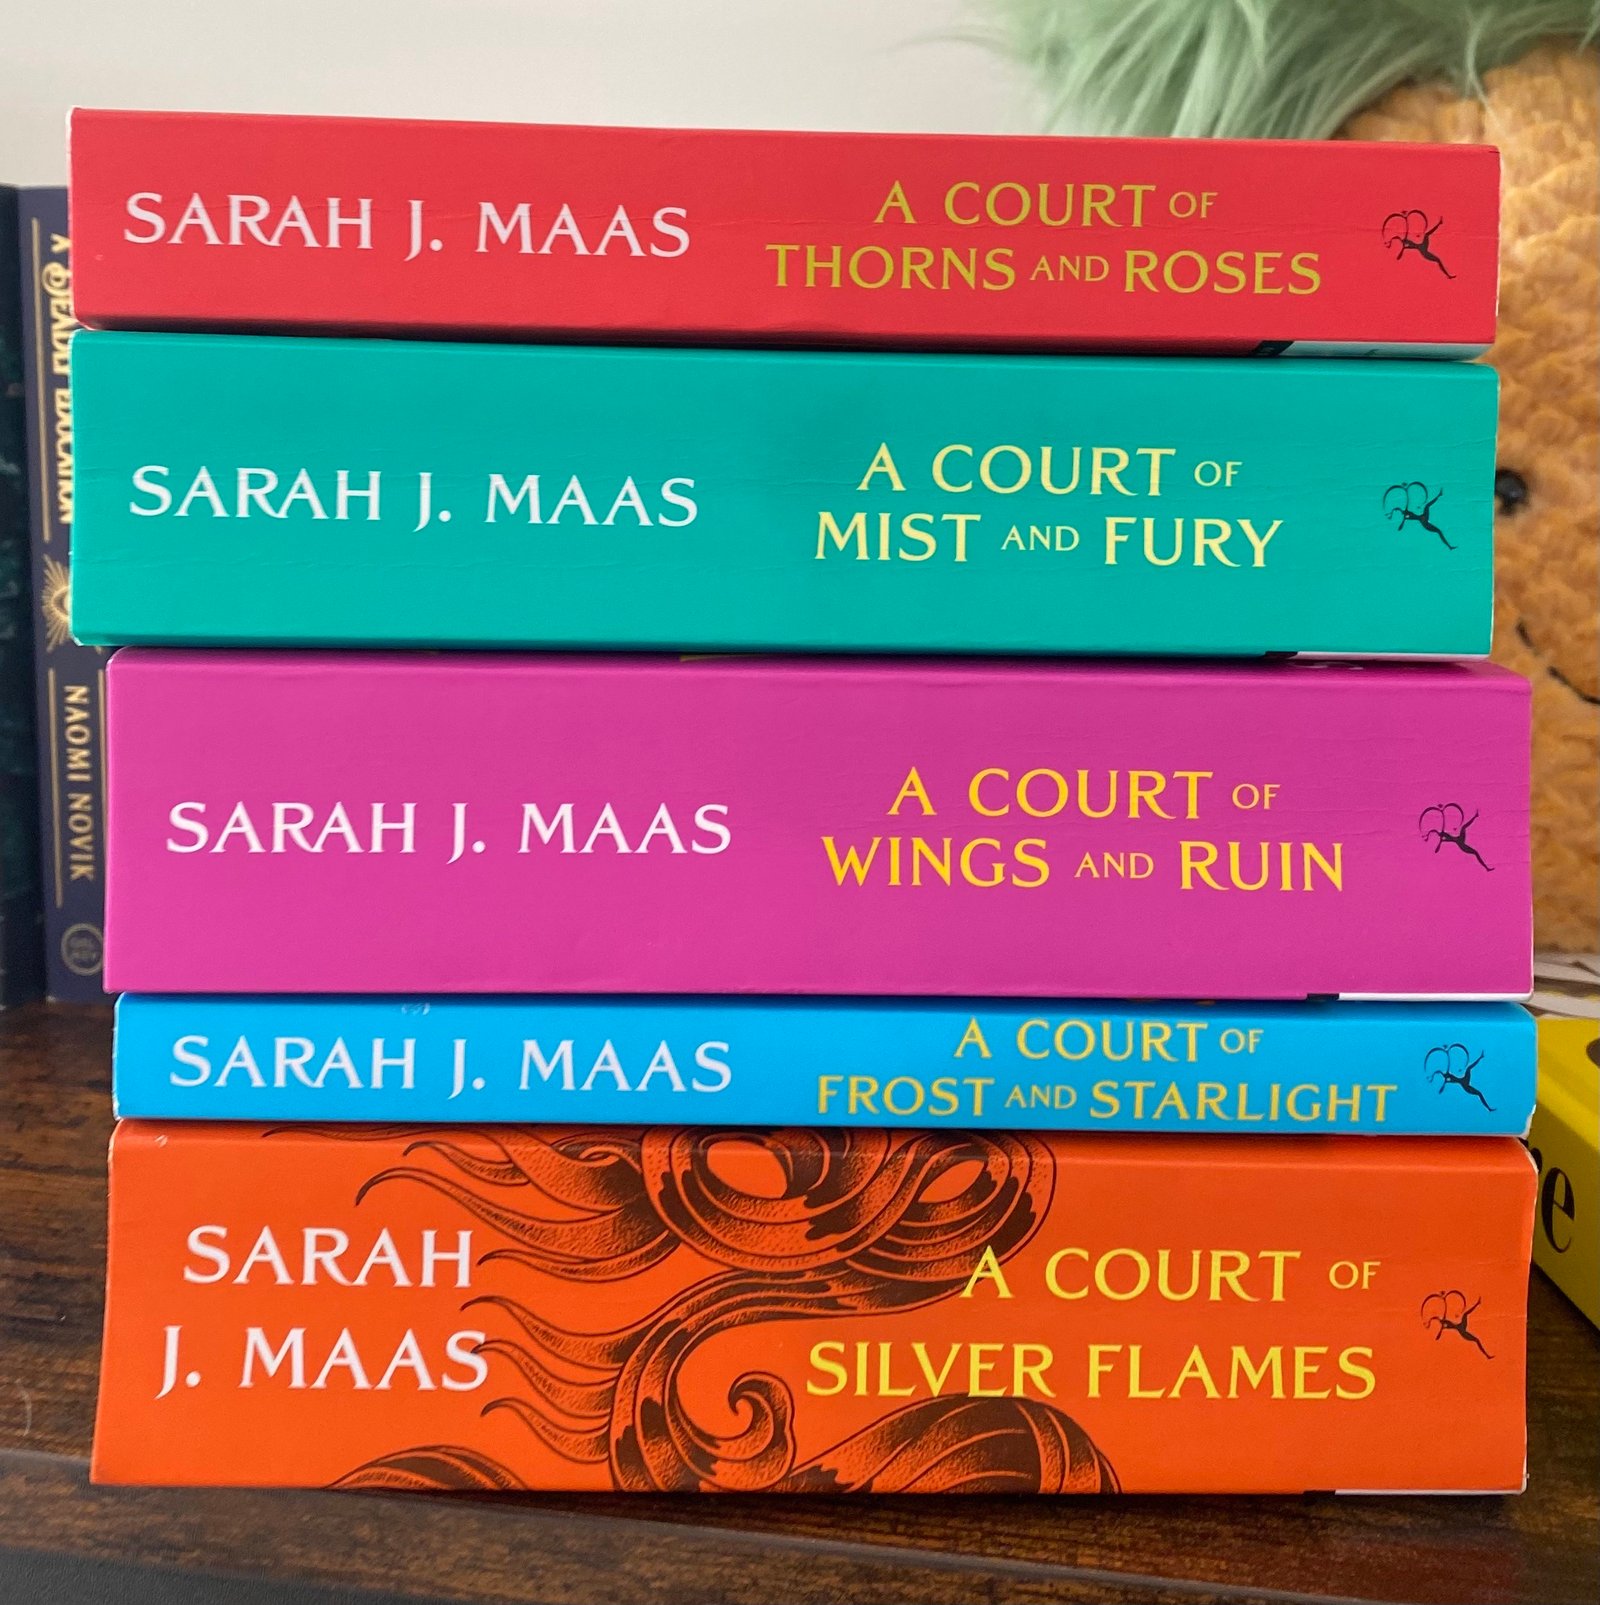 All ACOTAR books stacked on top of each other